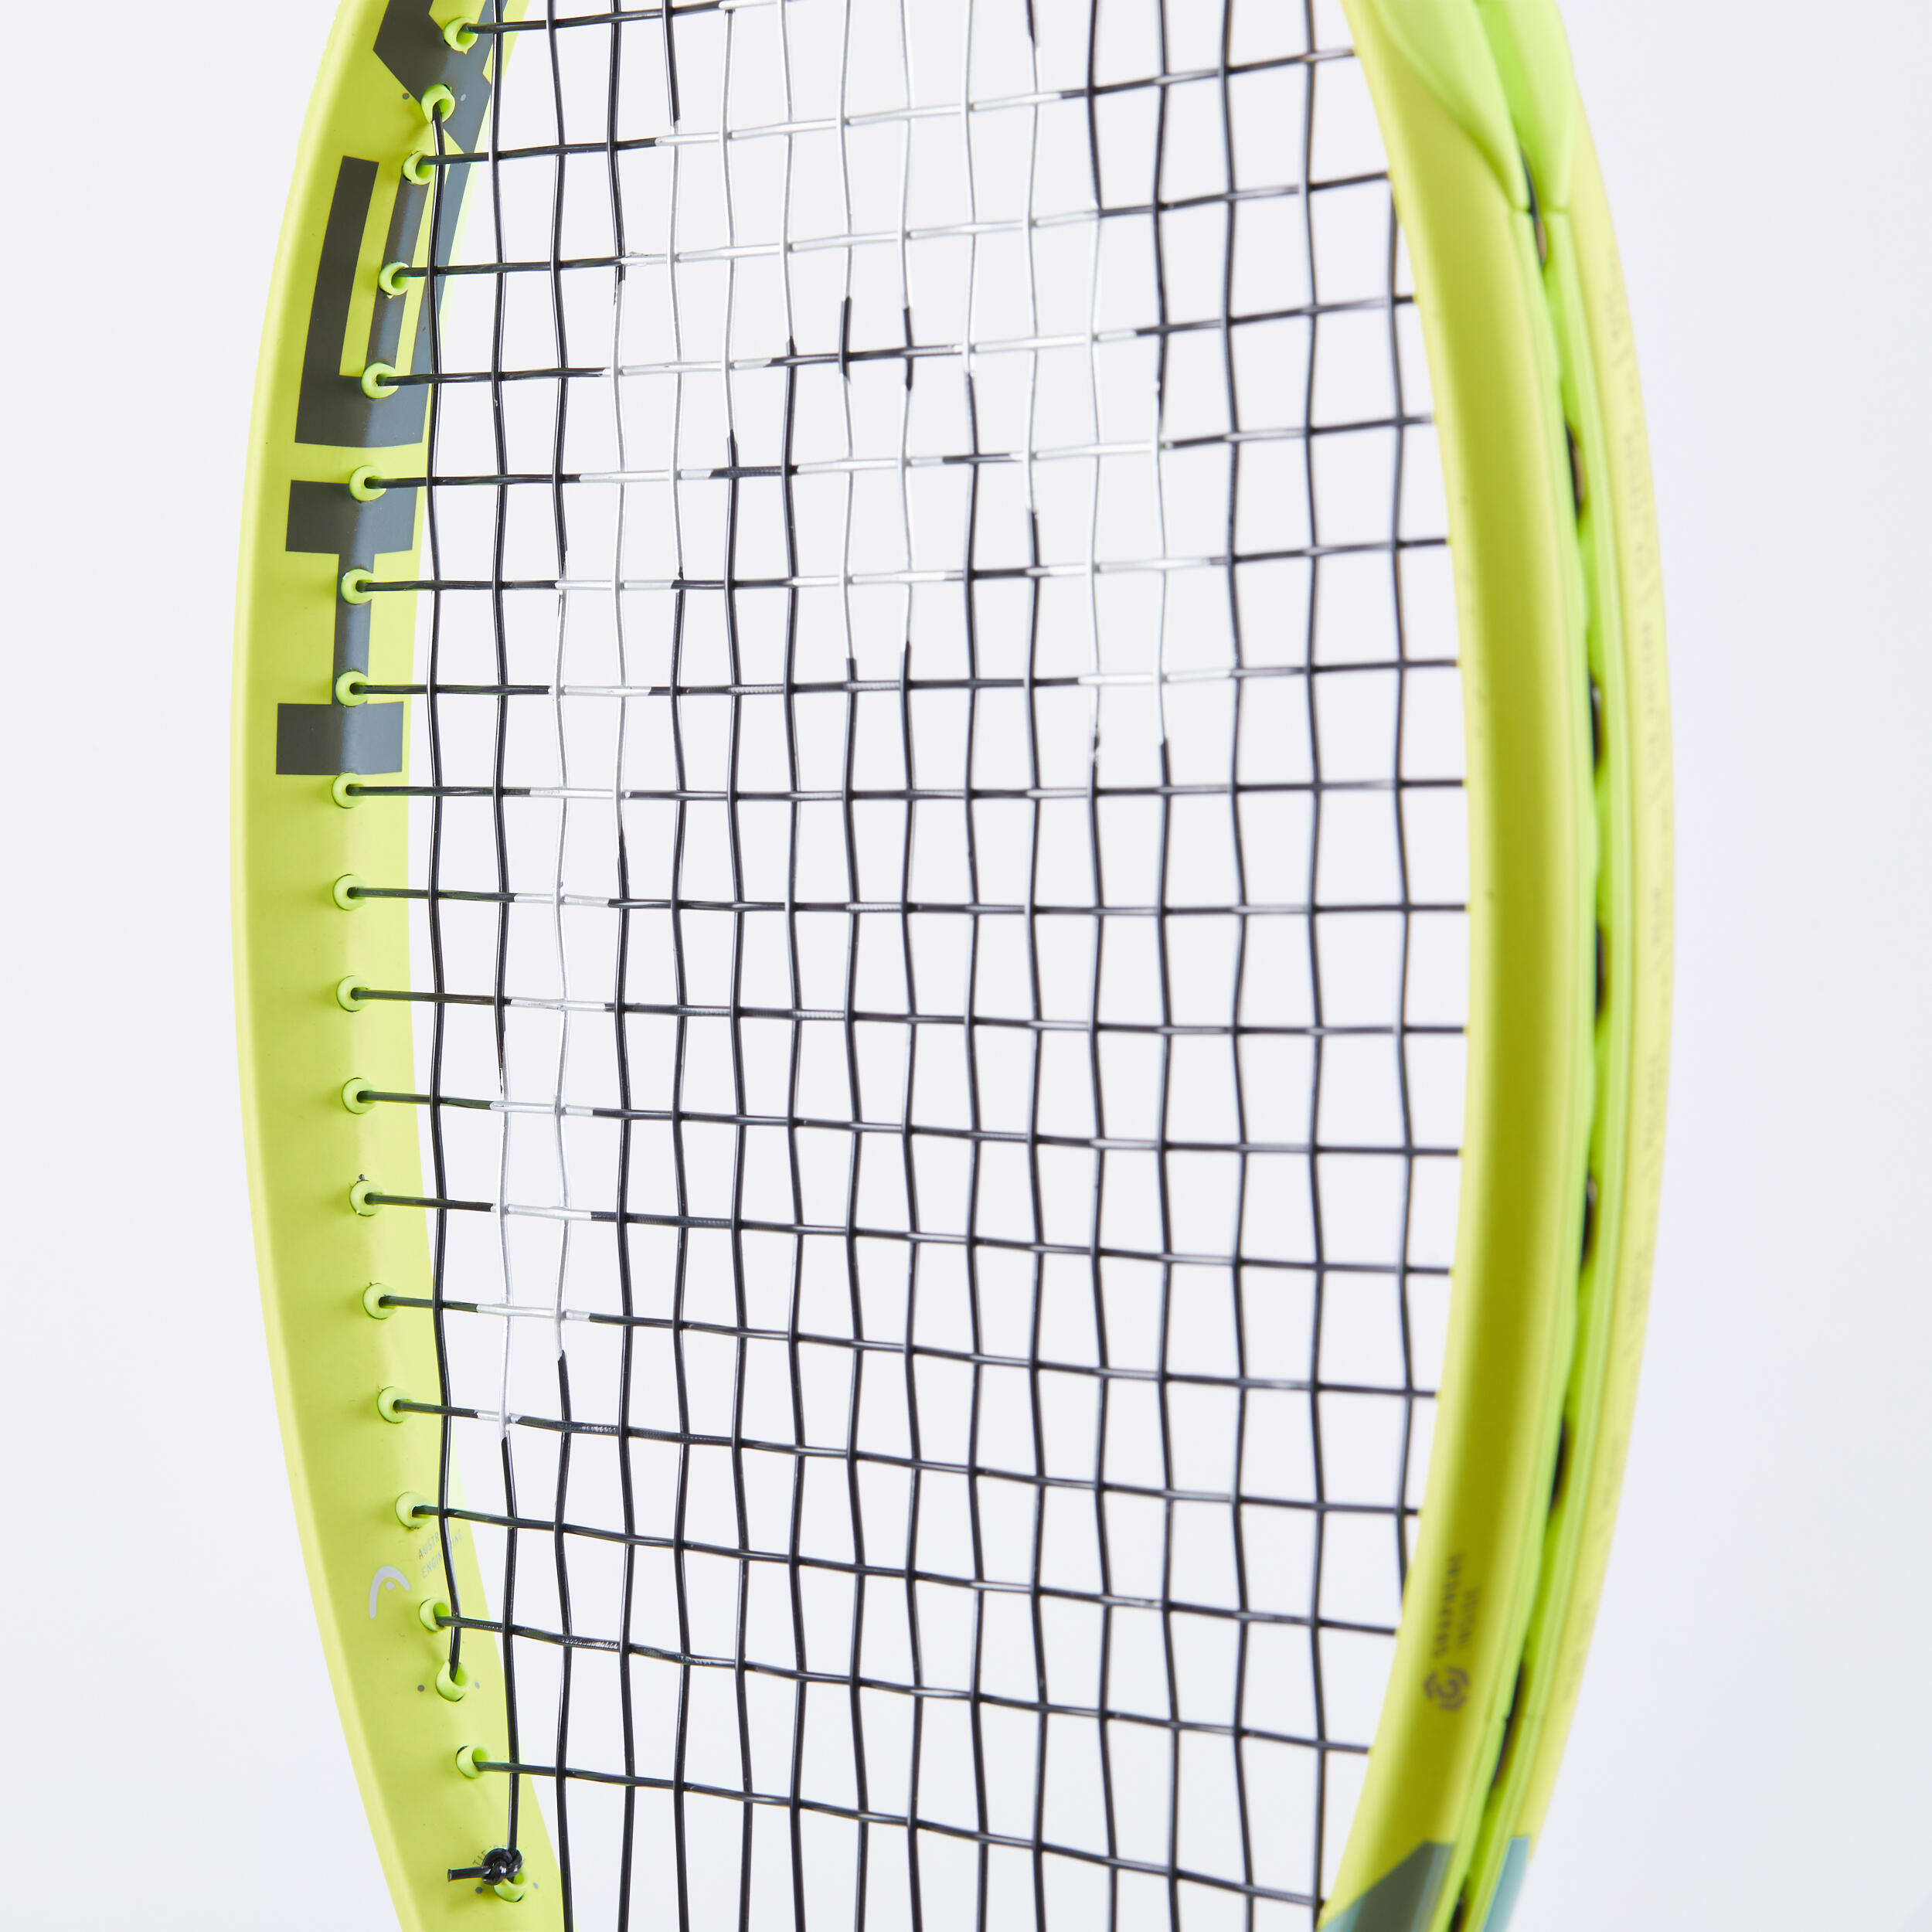 Adult Tennis Racket Auxetic Extreme MP Lite 285 g - Grey/Yellow 5/7